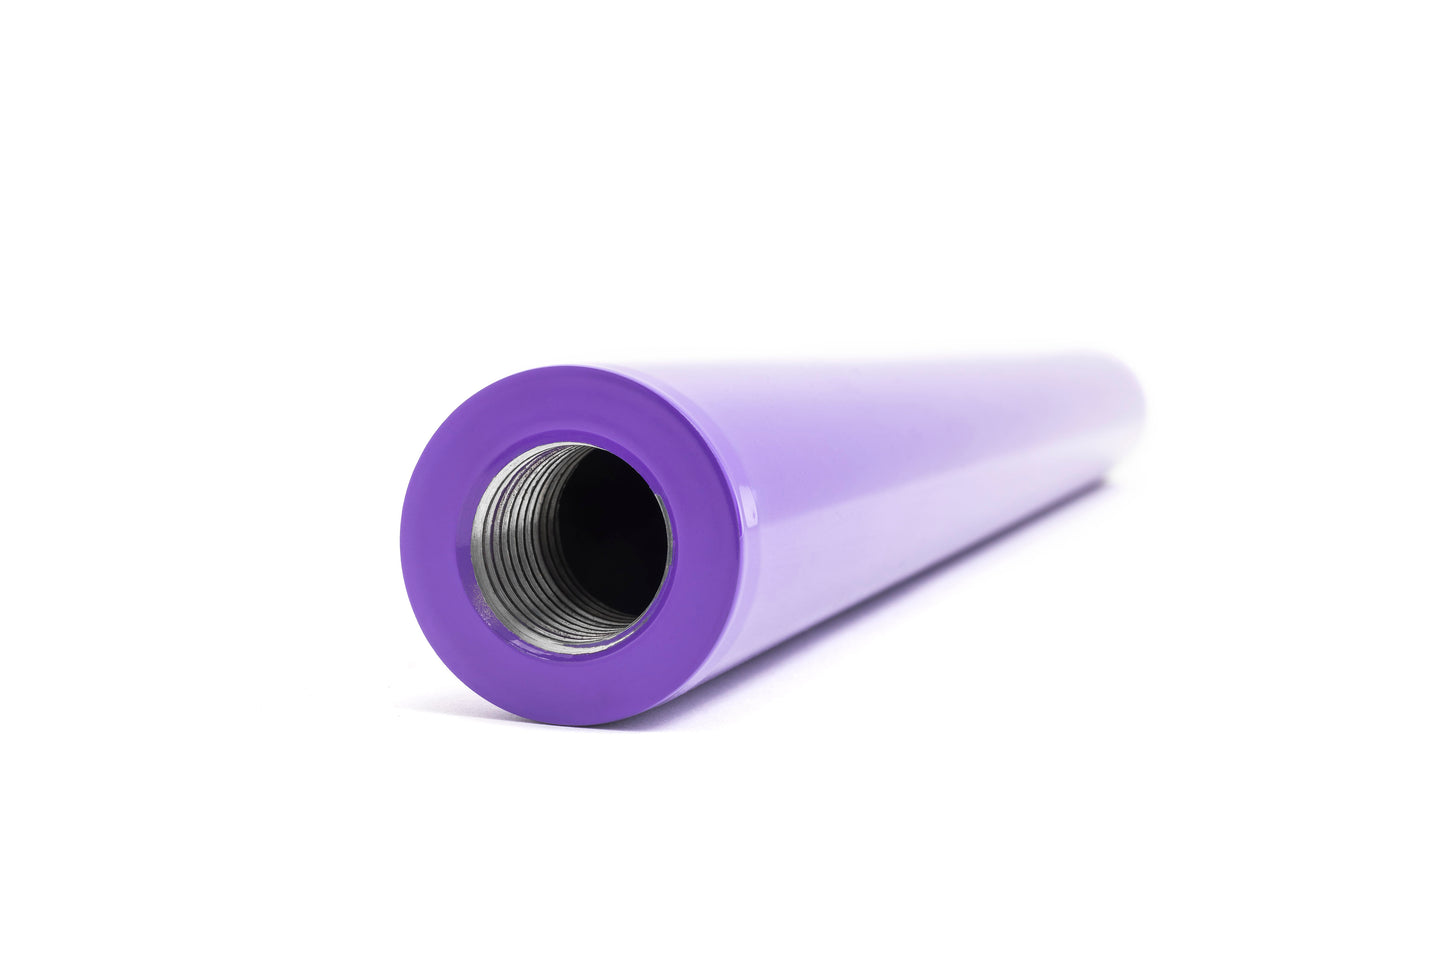 Fit 2 Flaunt Portable Pole Extensions Purple Powder Coated